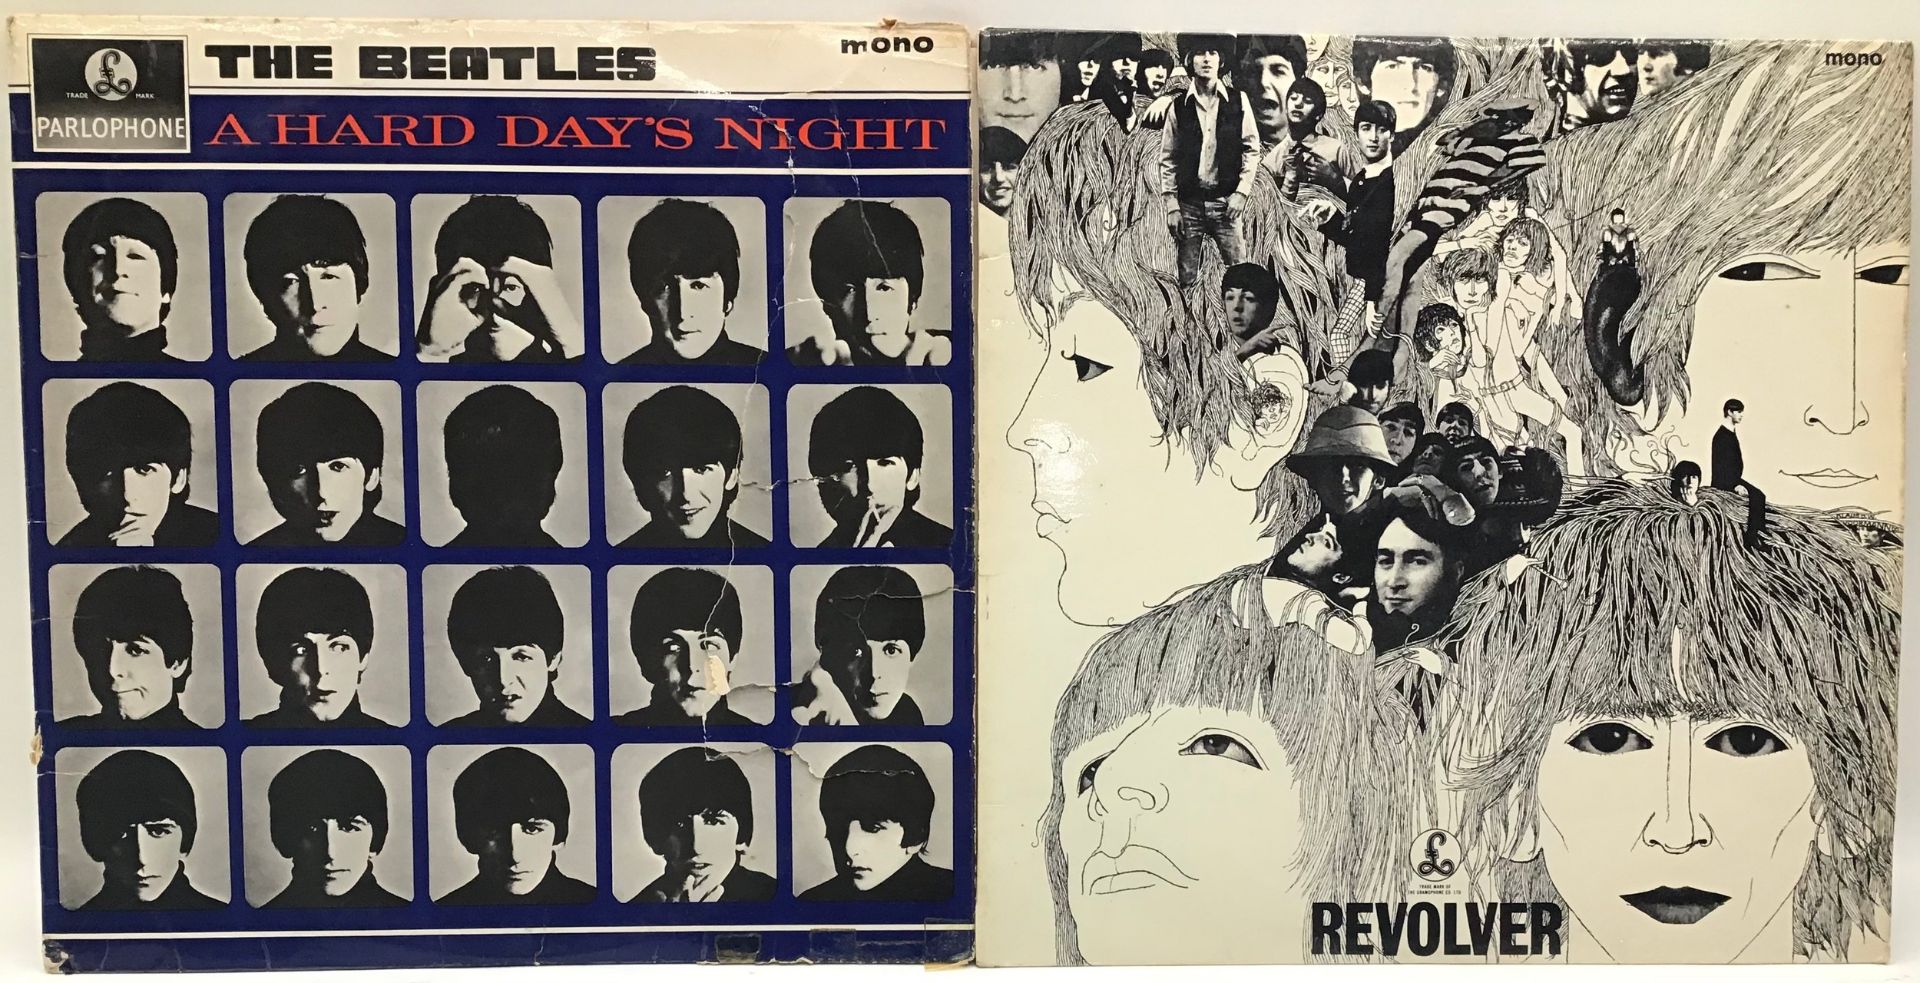 BEATLES VINYL LP RECORDS X 2. Both on yellow/black Parlophone labels we have a copy of 'A Hard